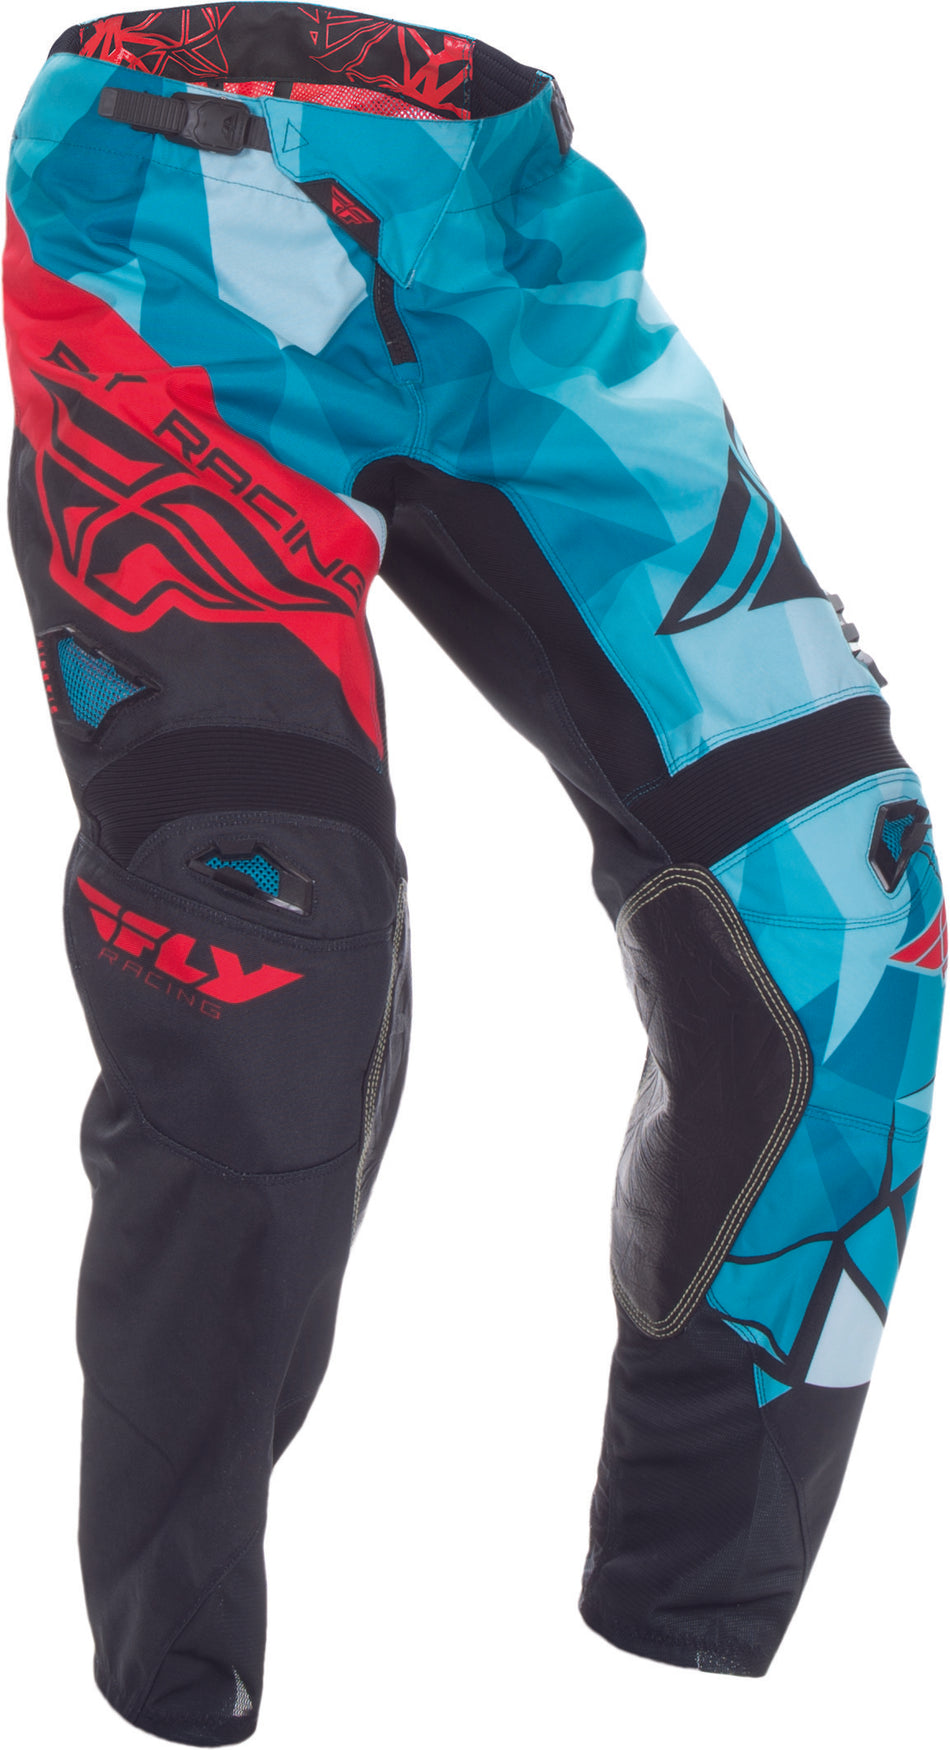 FLY RACING Kinetic Crux Pant Teal/Red Sz 32 370-53932